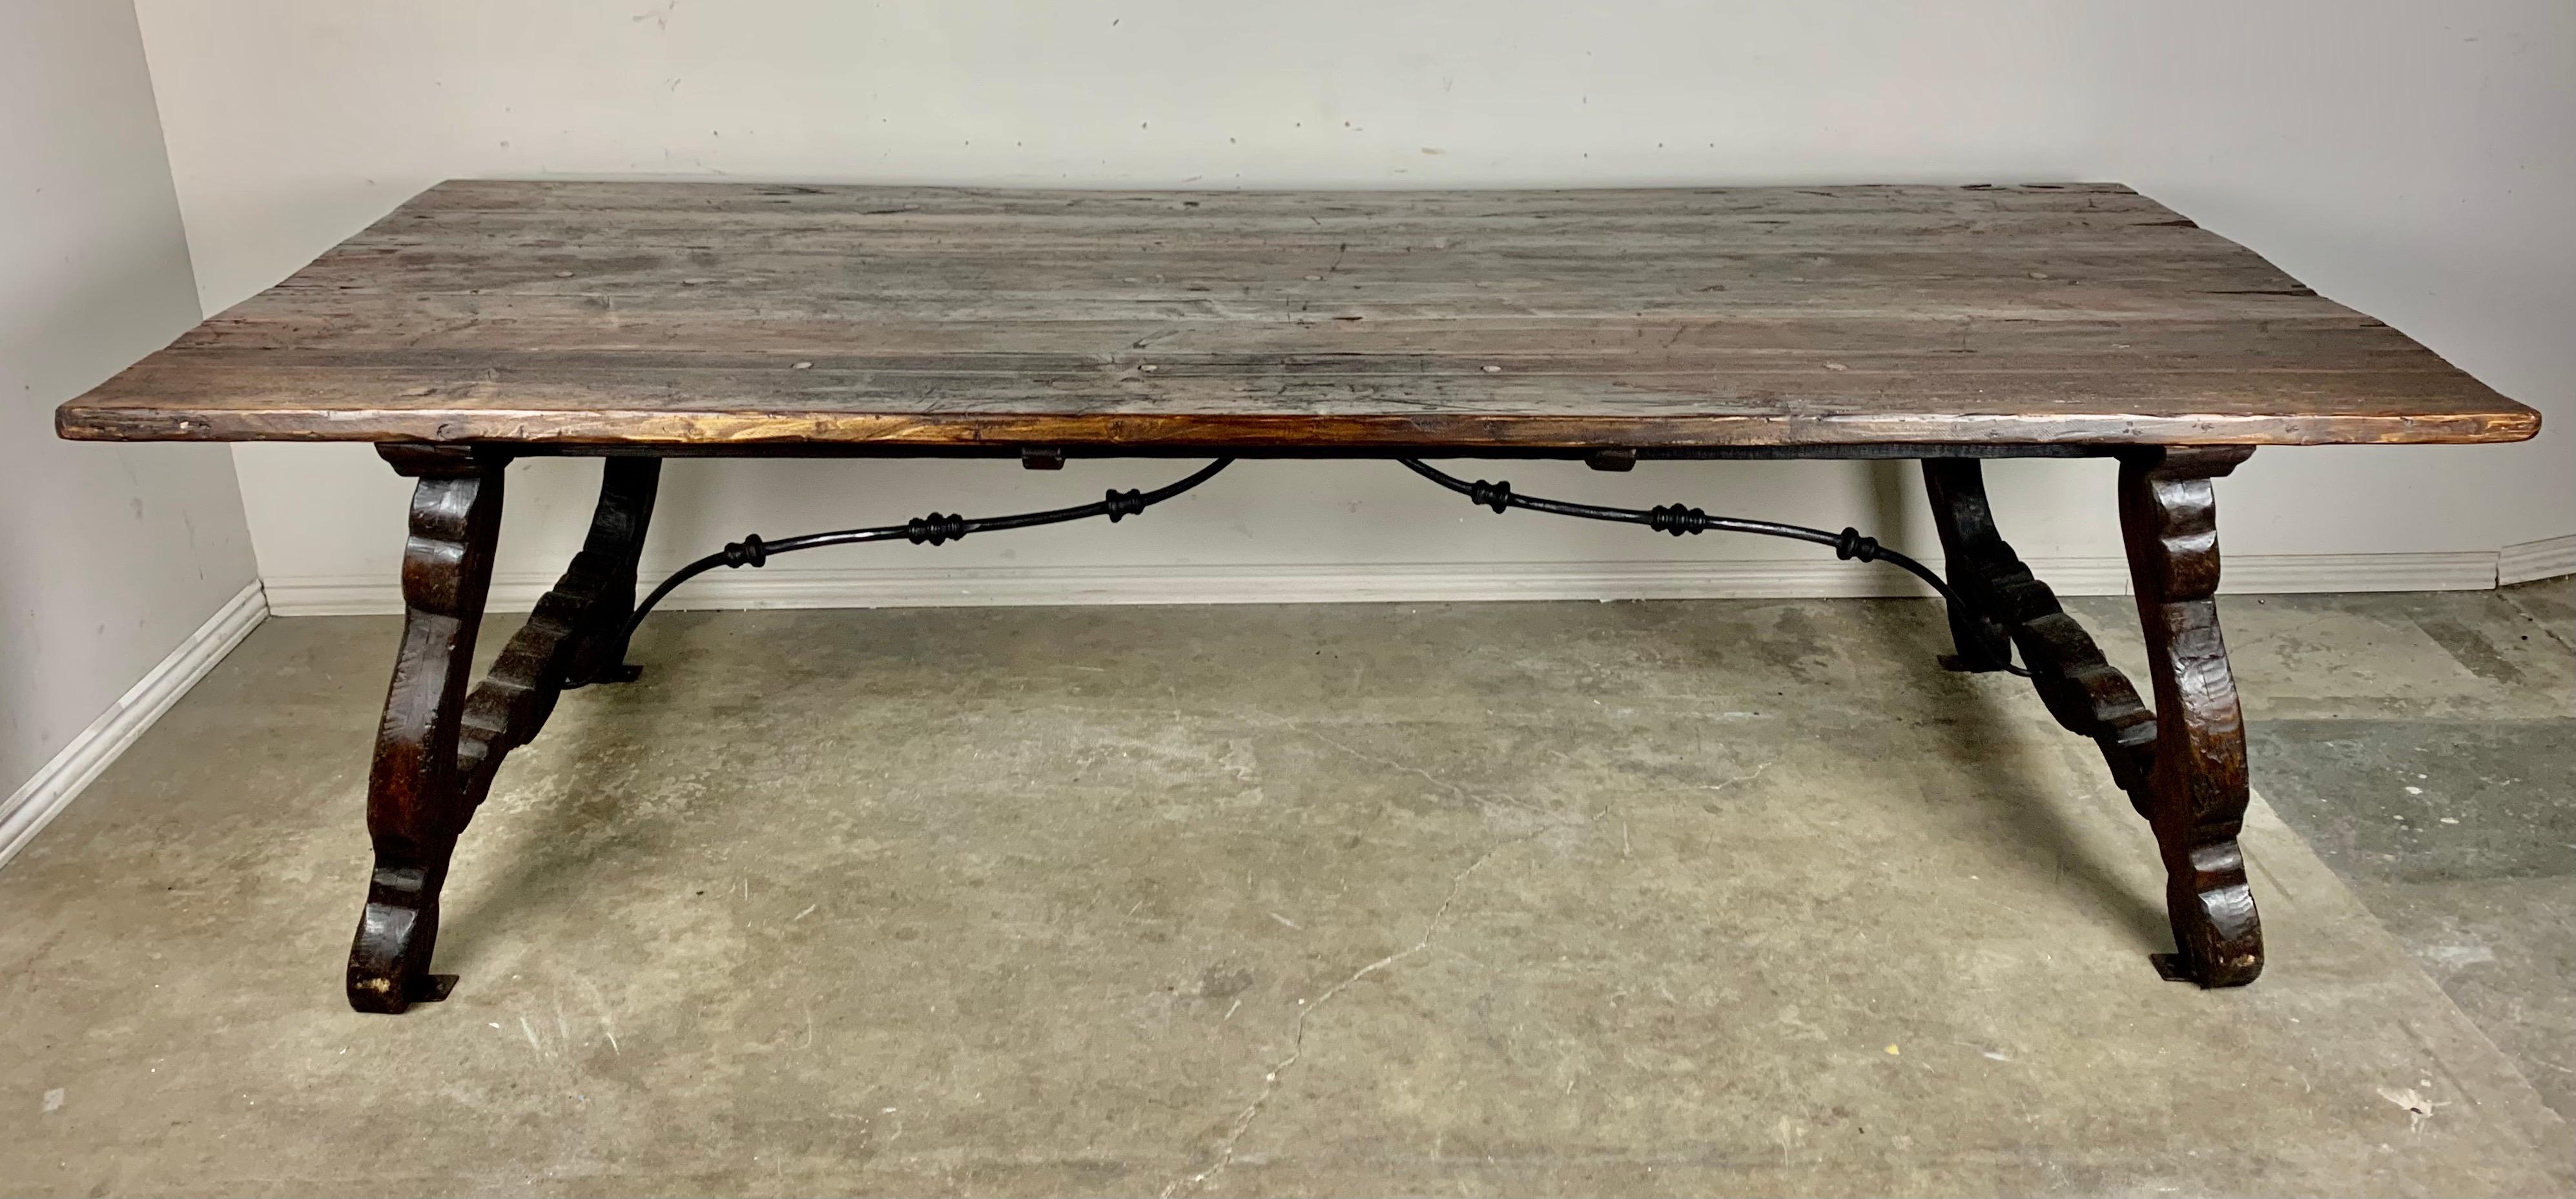 Spanish trestle style dining table standing on two lyre shaped pedestals. Handwrought iron stretcher connects the lyre pedestals. The large rectangular shaped top shows distressing including cracks and repairs, but I think it adds character to a